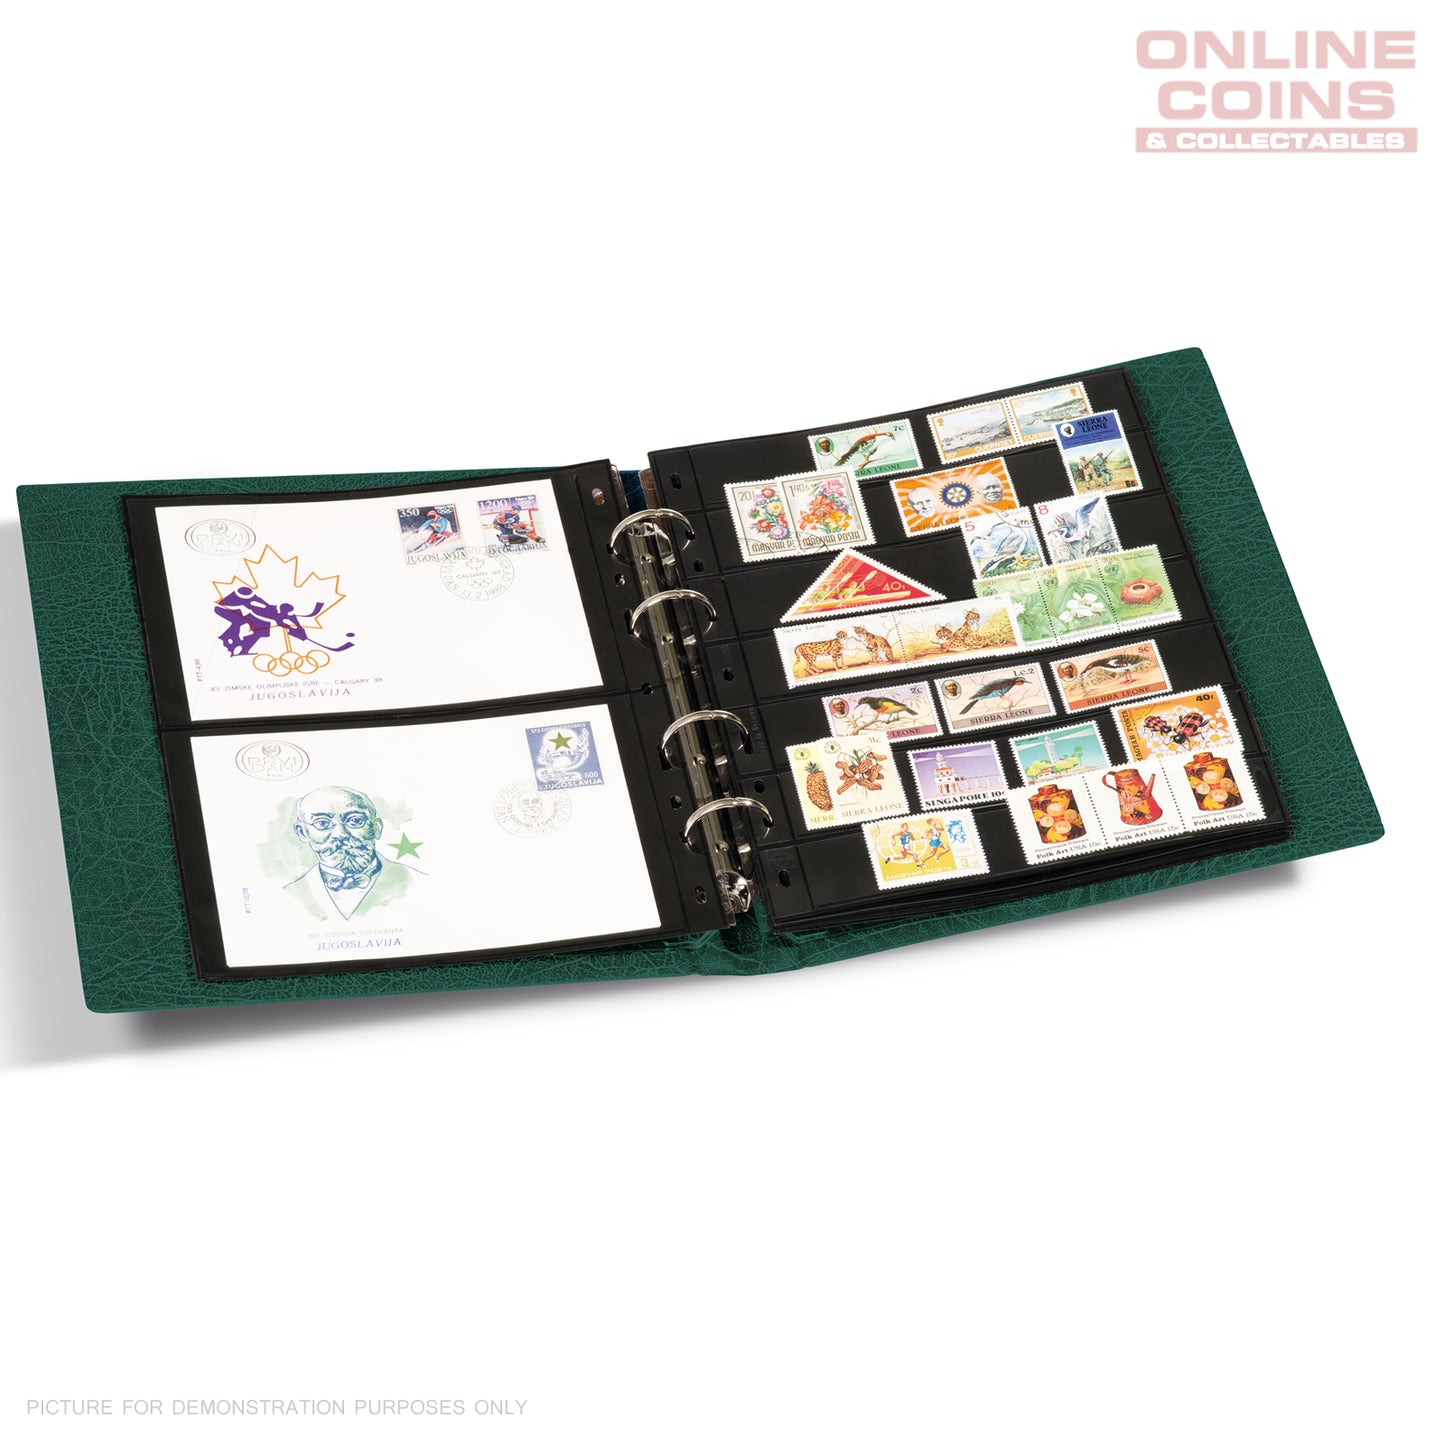 Lighthouse - OPTIMA F Binder and Slipcase for Coins, Stamps & Banknotes - GREEN